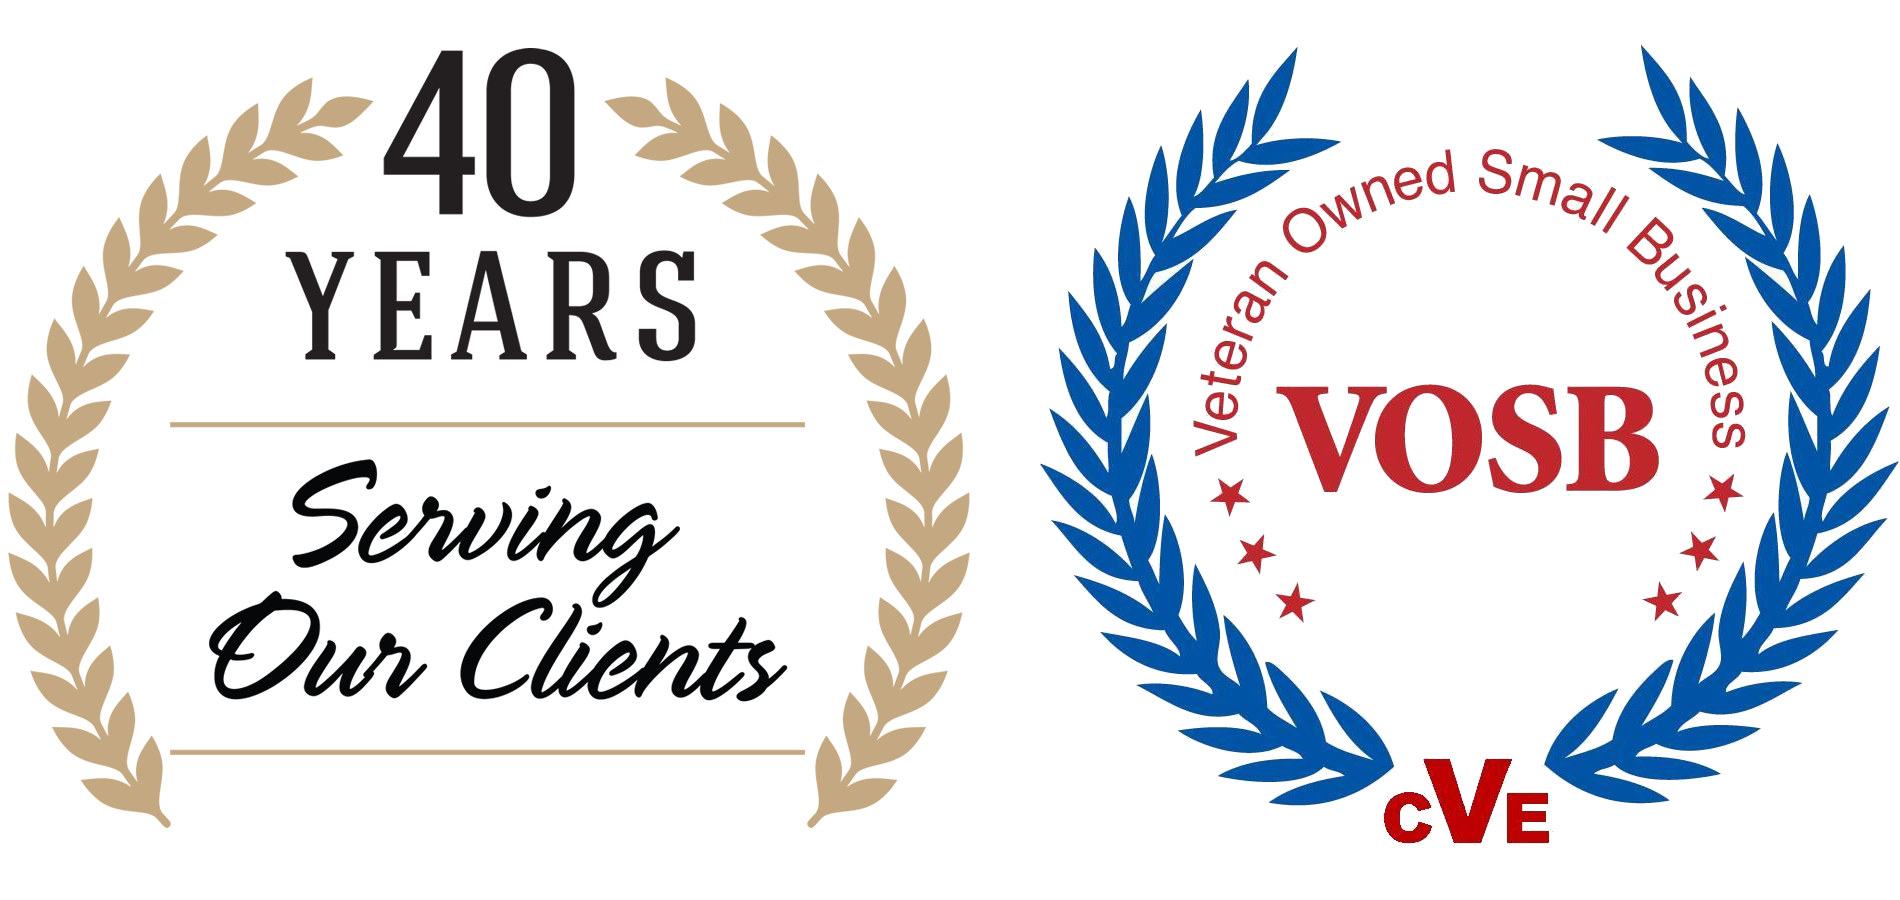 Combined 40 Year VOSB Logos